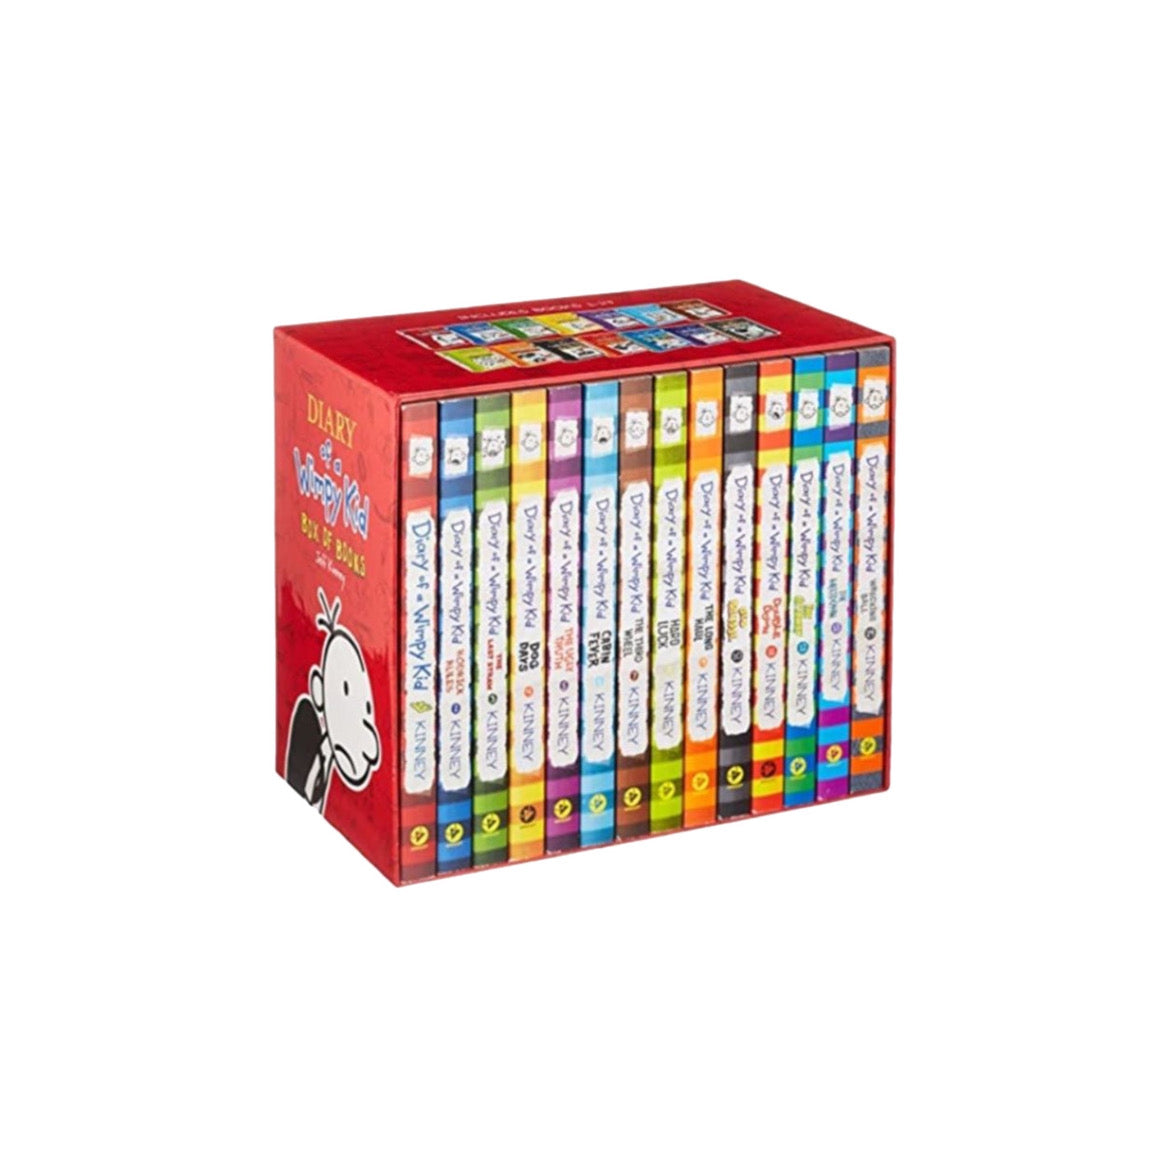 Diary of a Wimpy Kid (14-Book Set) by Jeff Kinney